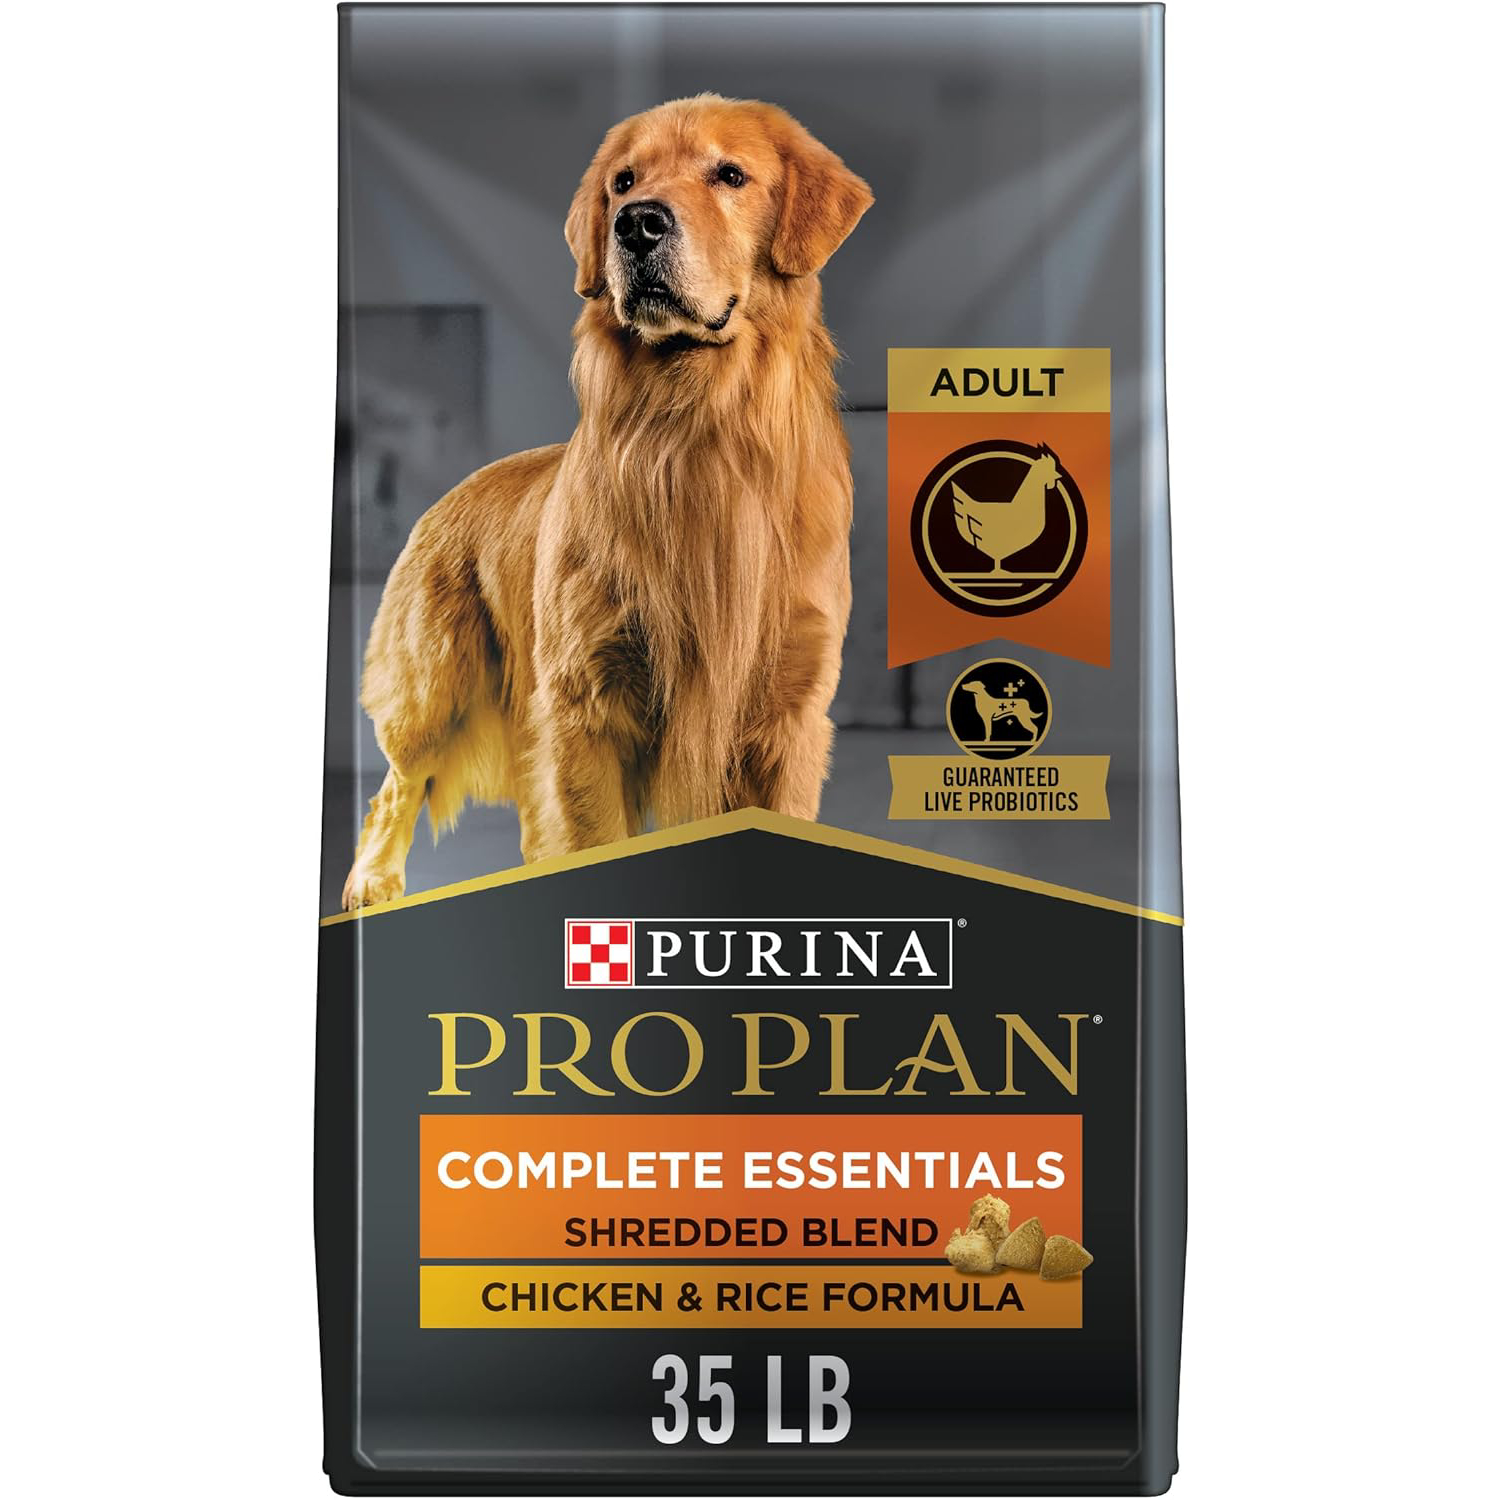 Purina Pro Plan High Protein Dog Food With Probiotics for Dogs, Shredded Blend Chicken & Rice Formula